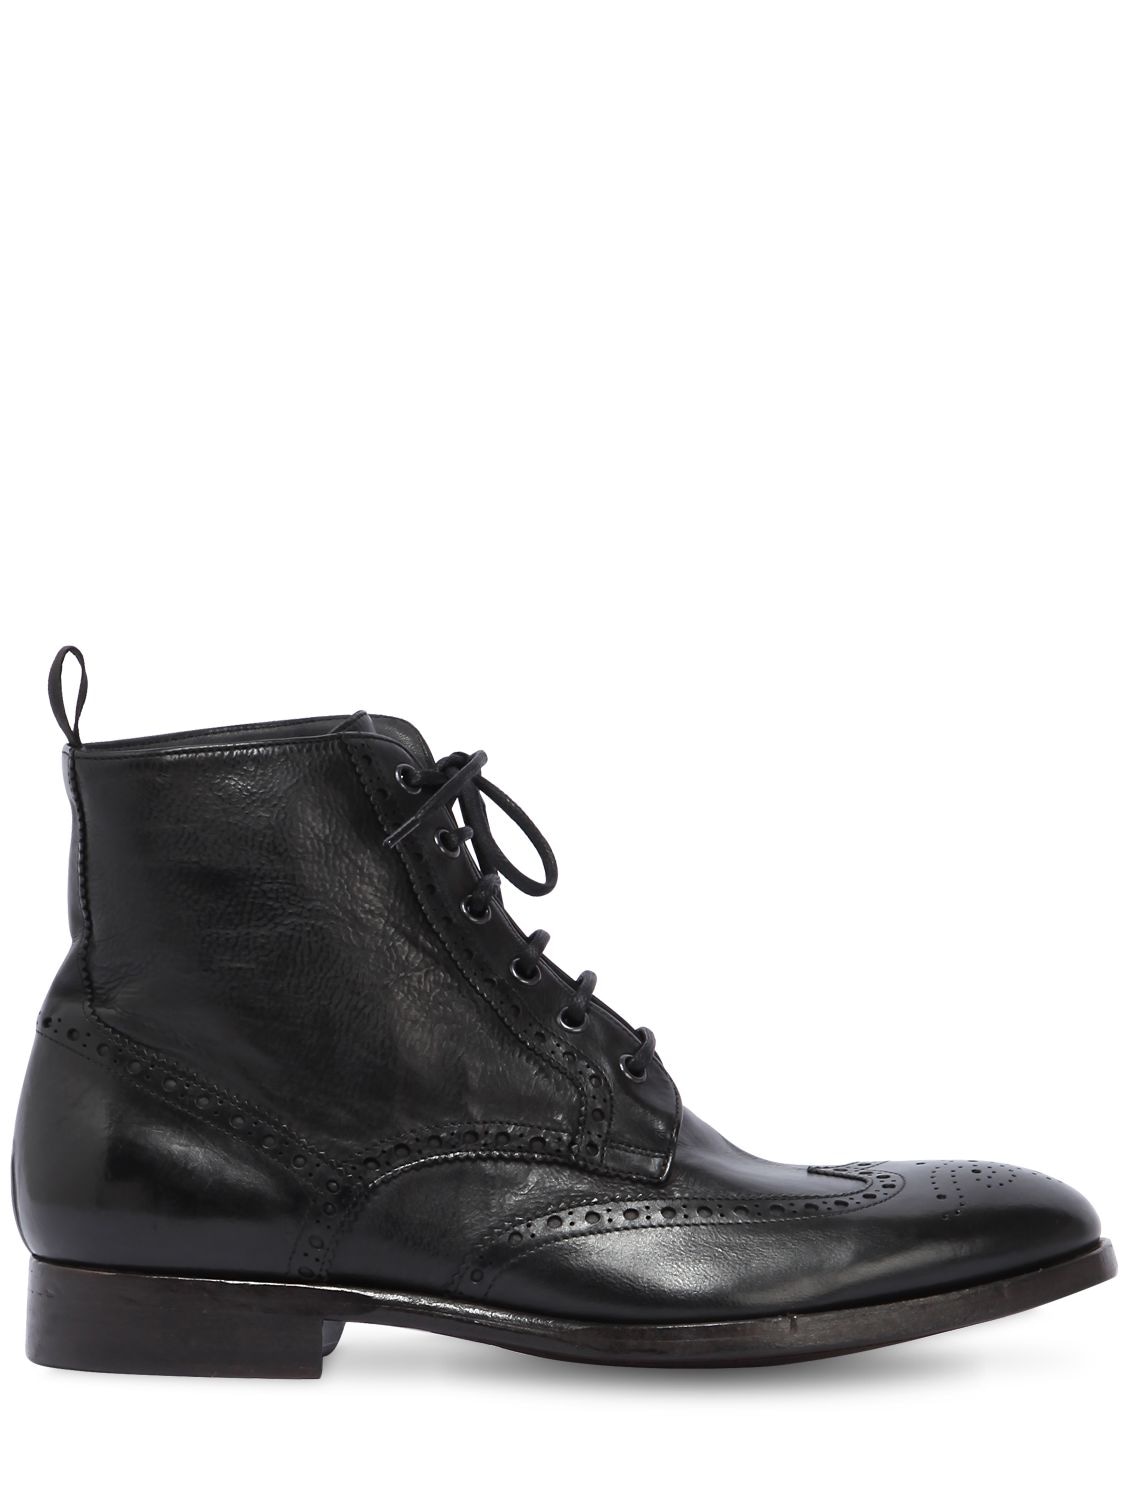 Rolando Sturlini Wing Tip Washed Leather Boots In Black